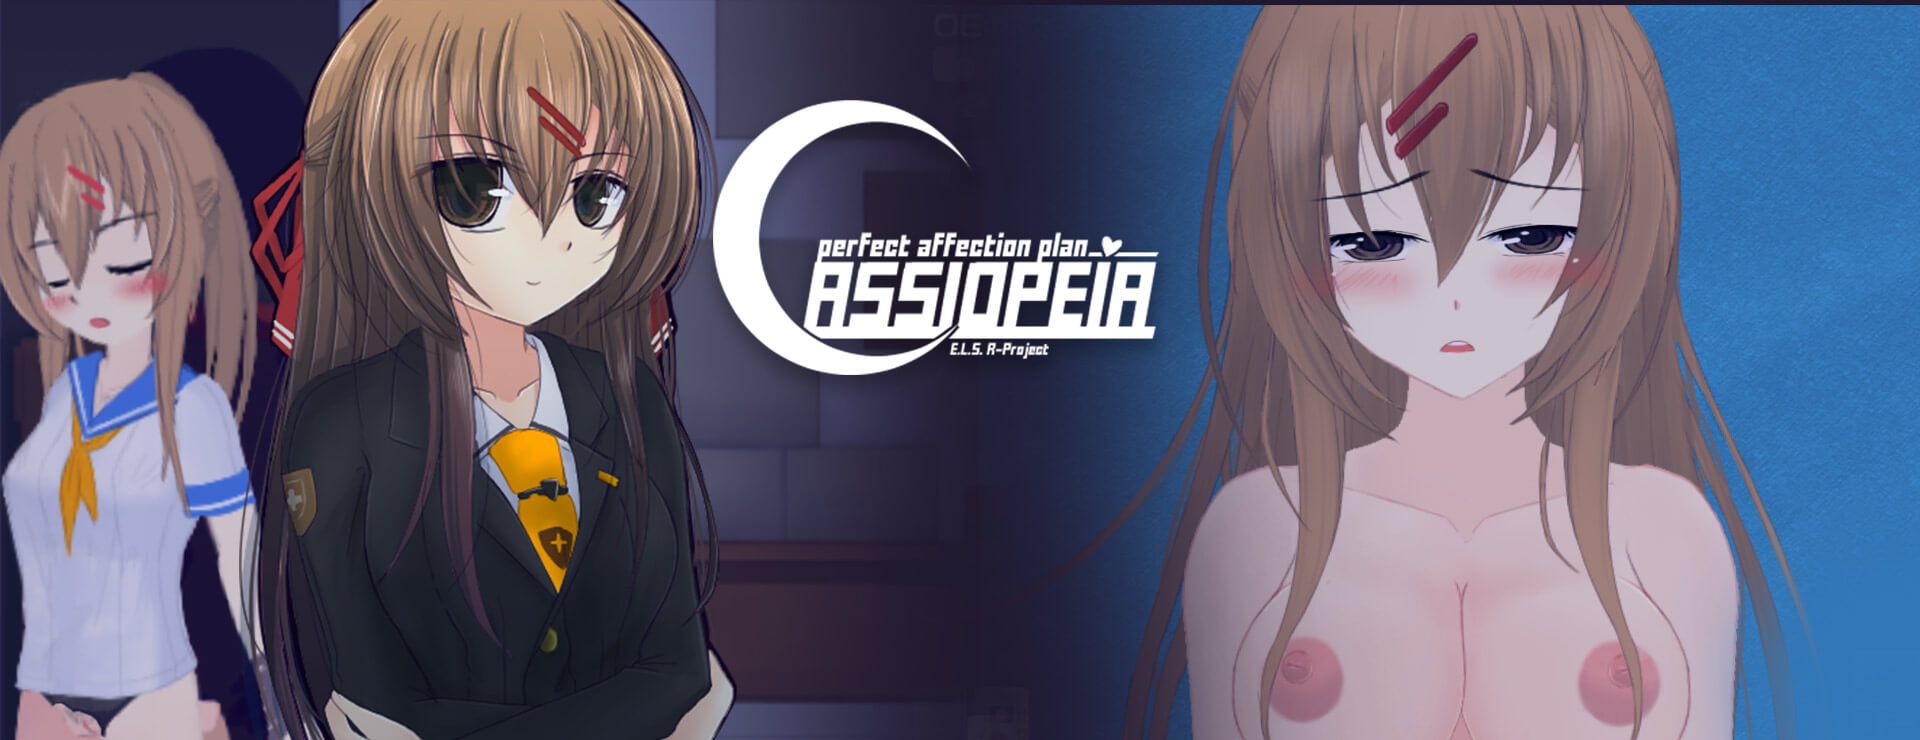 Perfect Affection Plan: Cassiopeia - Simulation Game